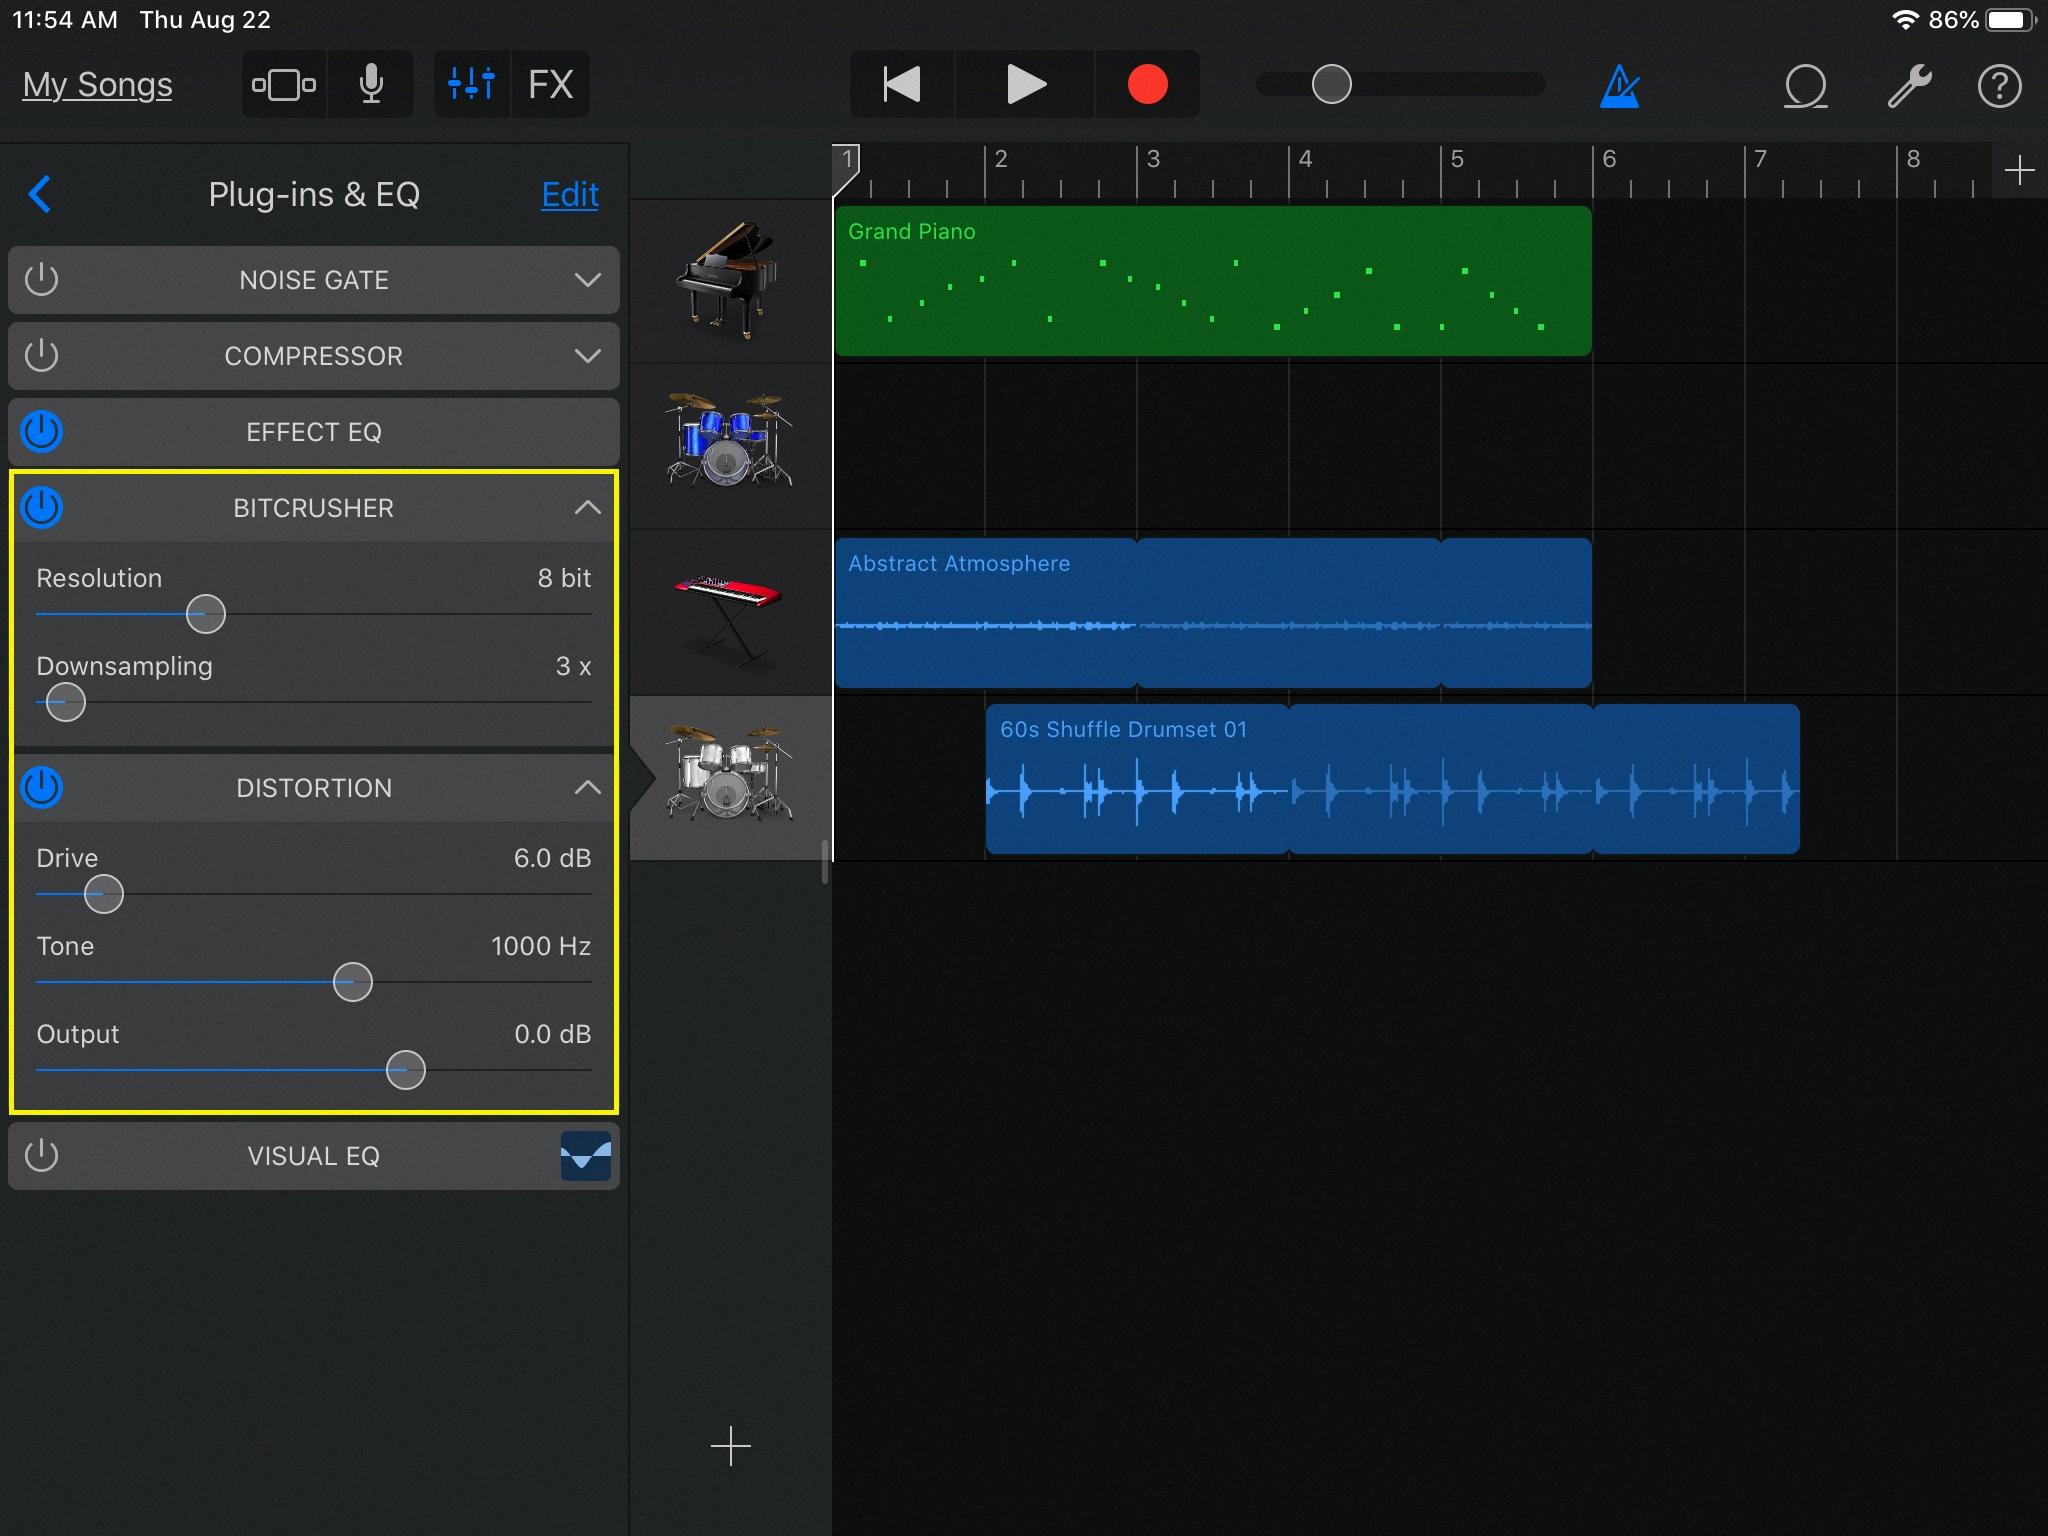 How To Add More Plugins In Garageband 11